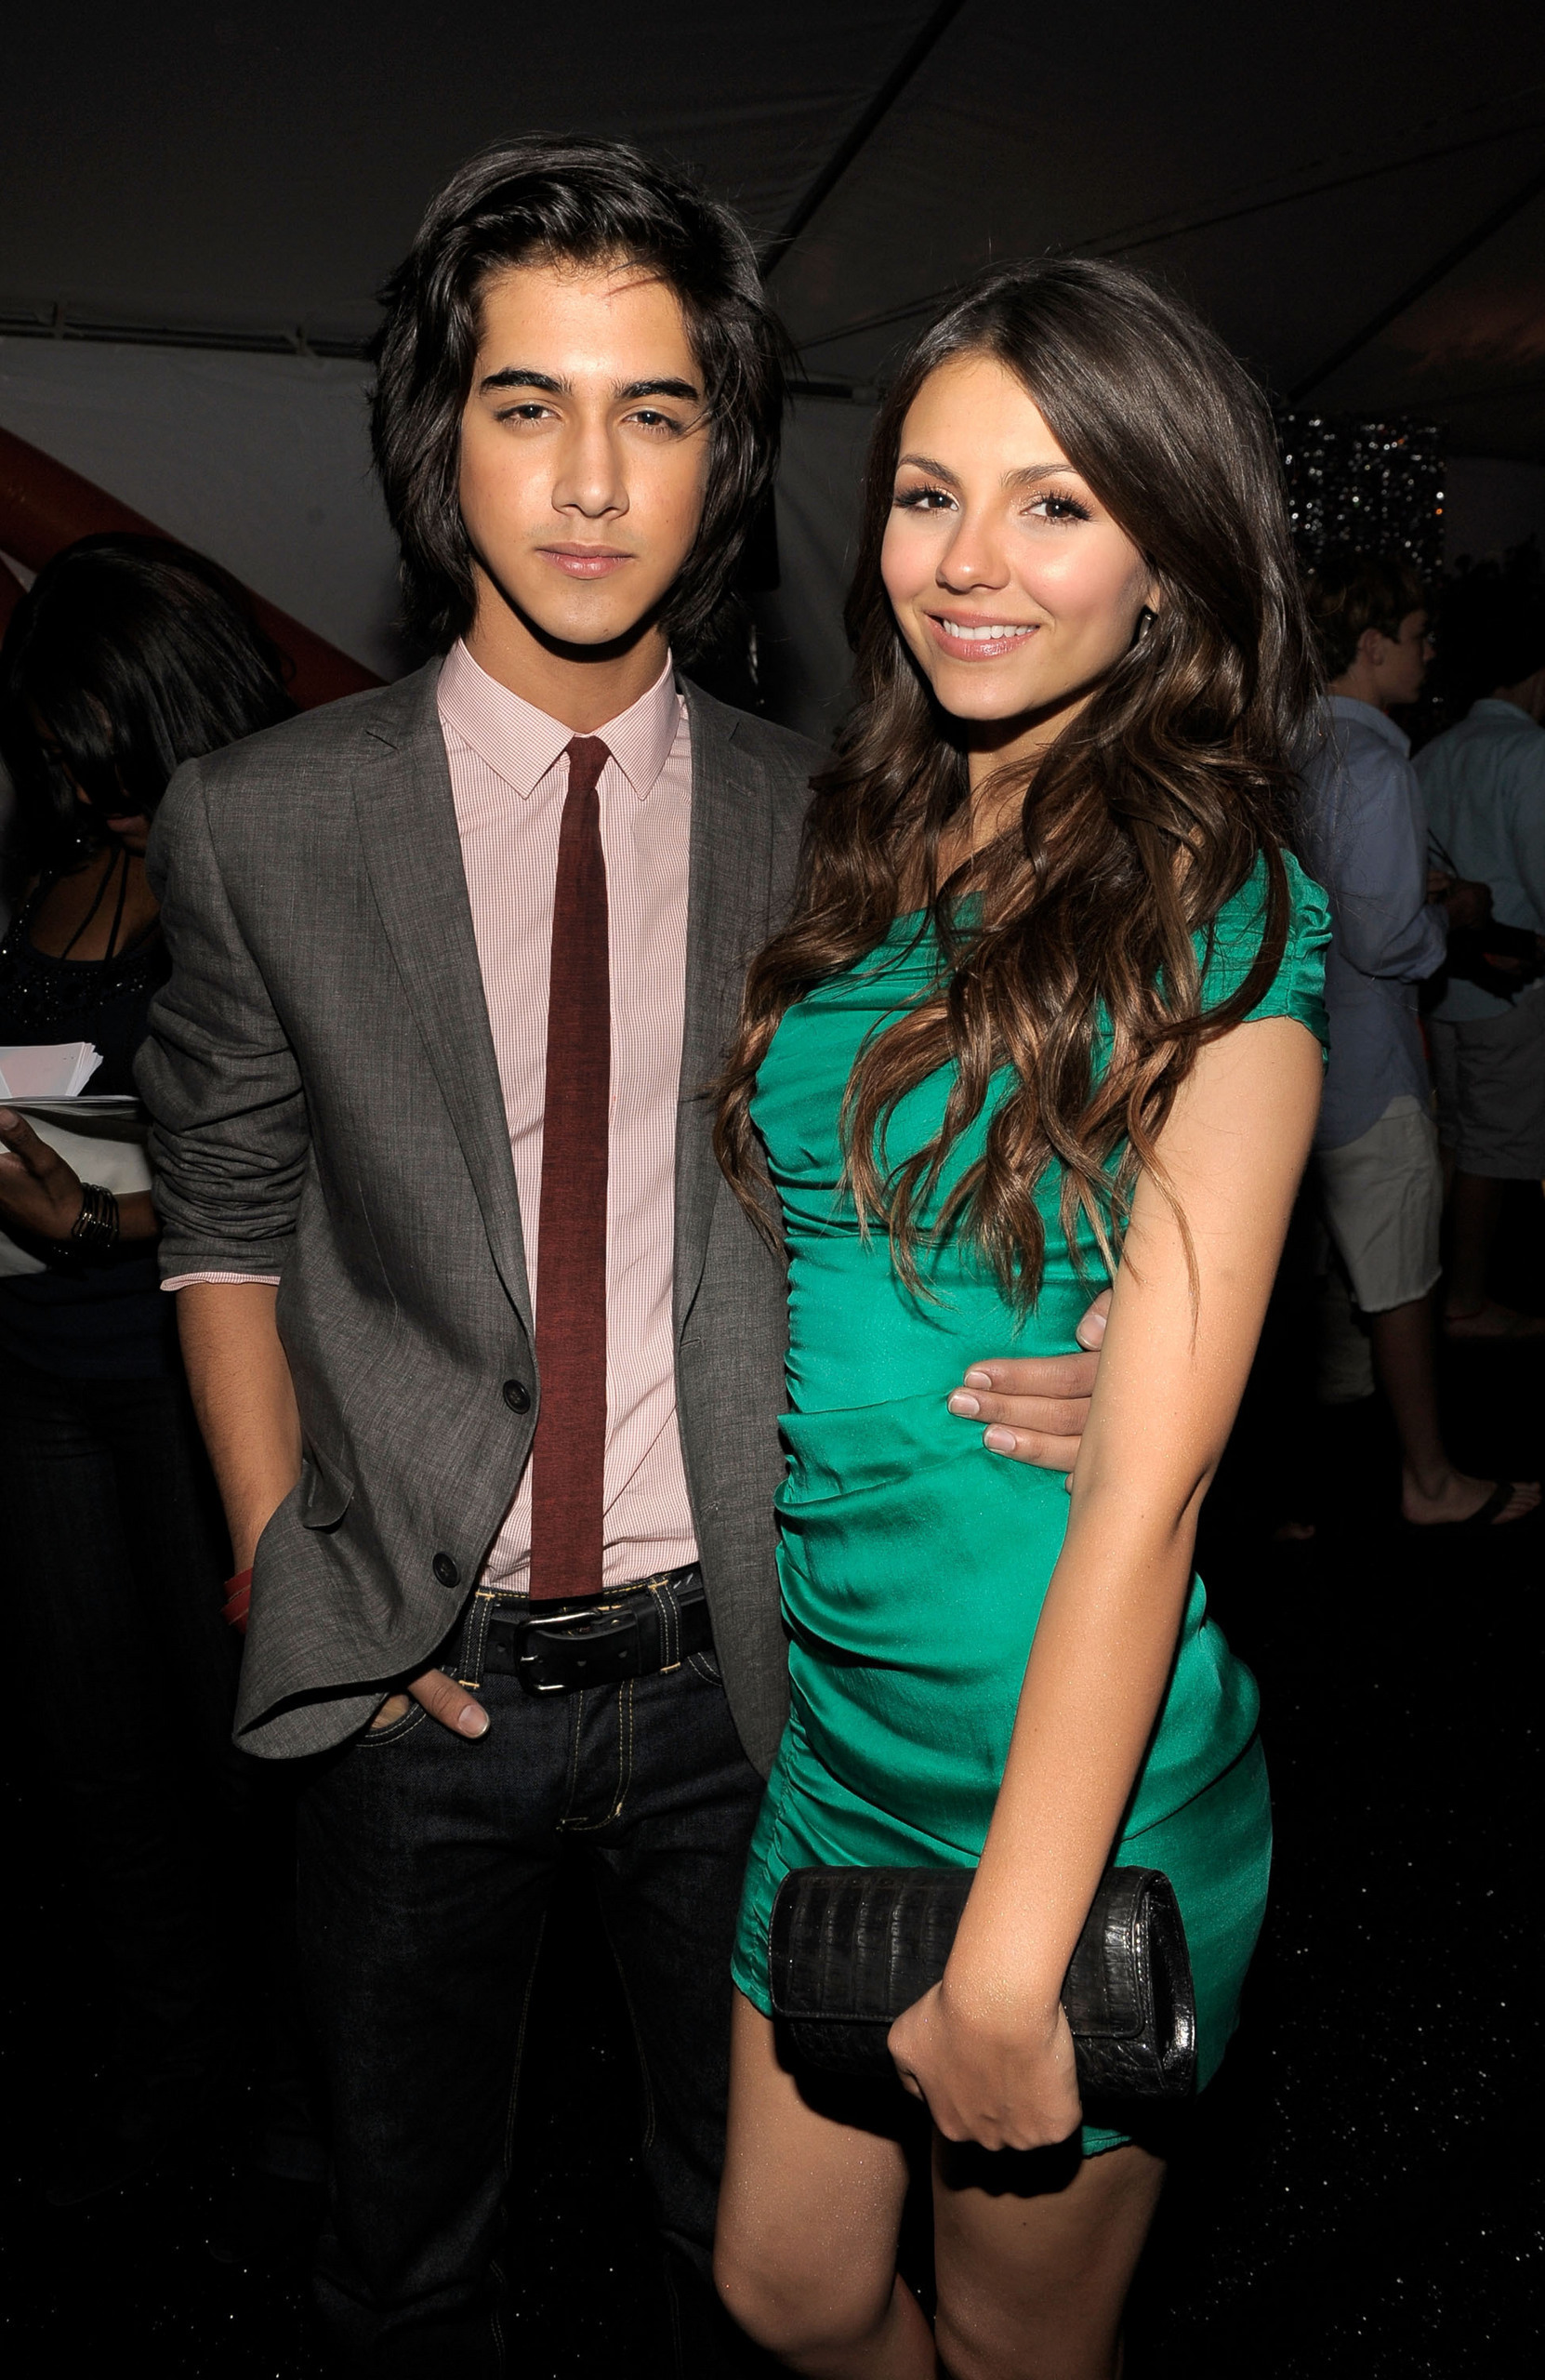 avan jogia and victoria justice are they dating